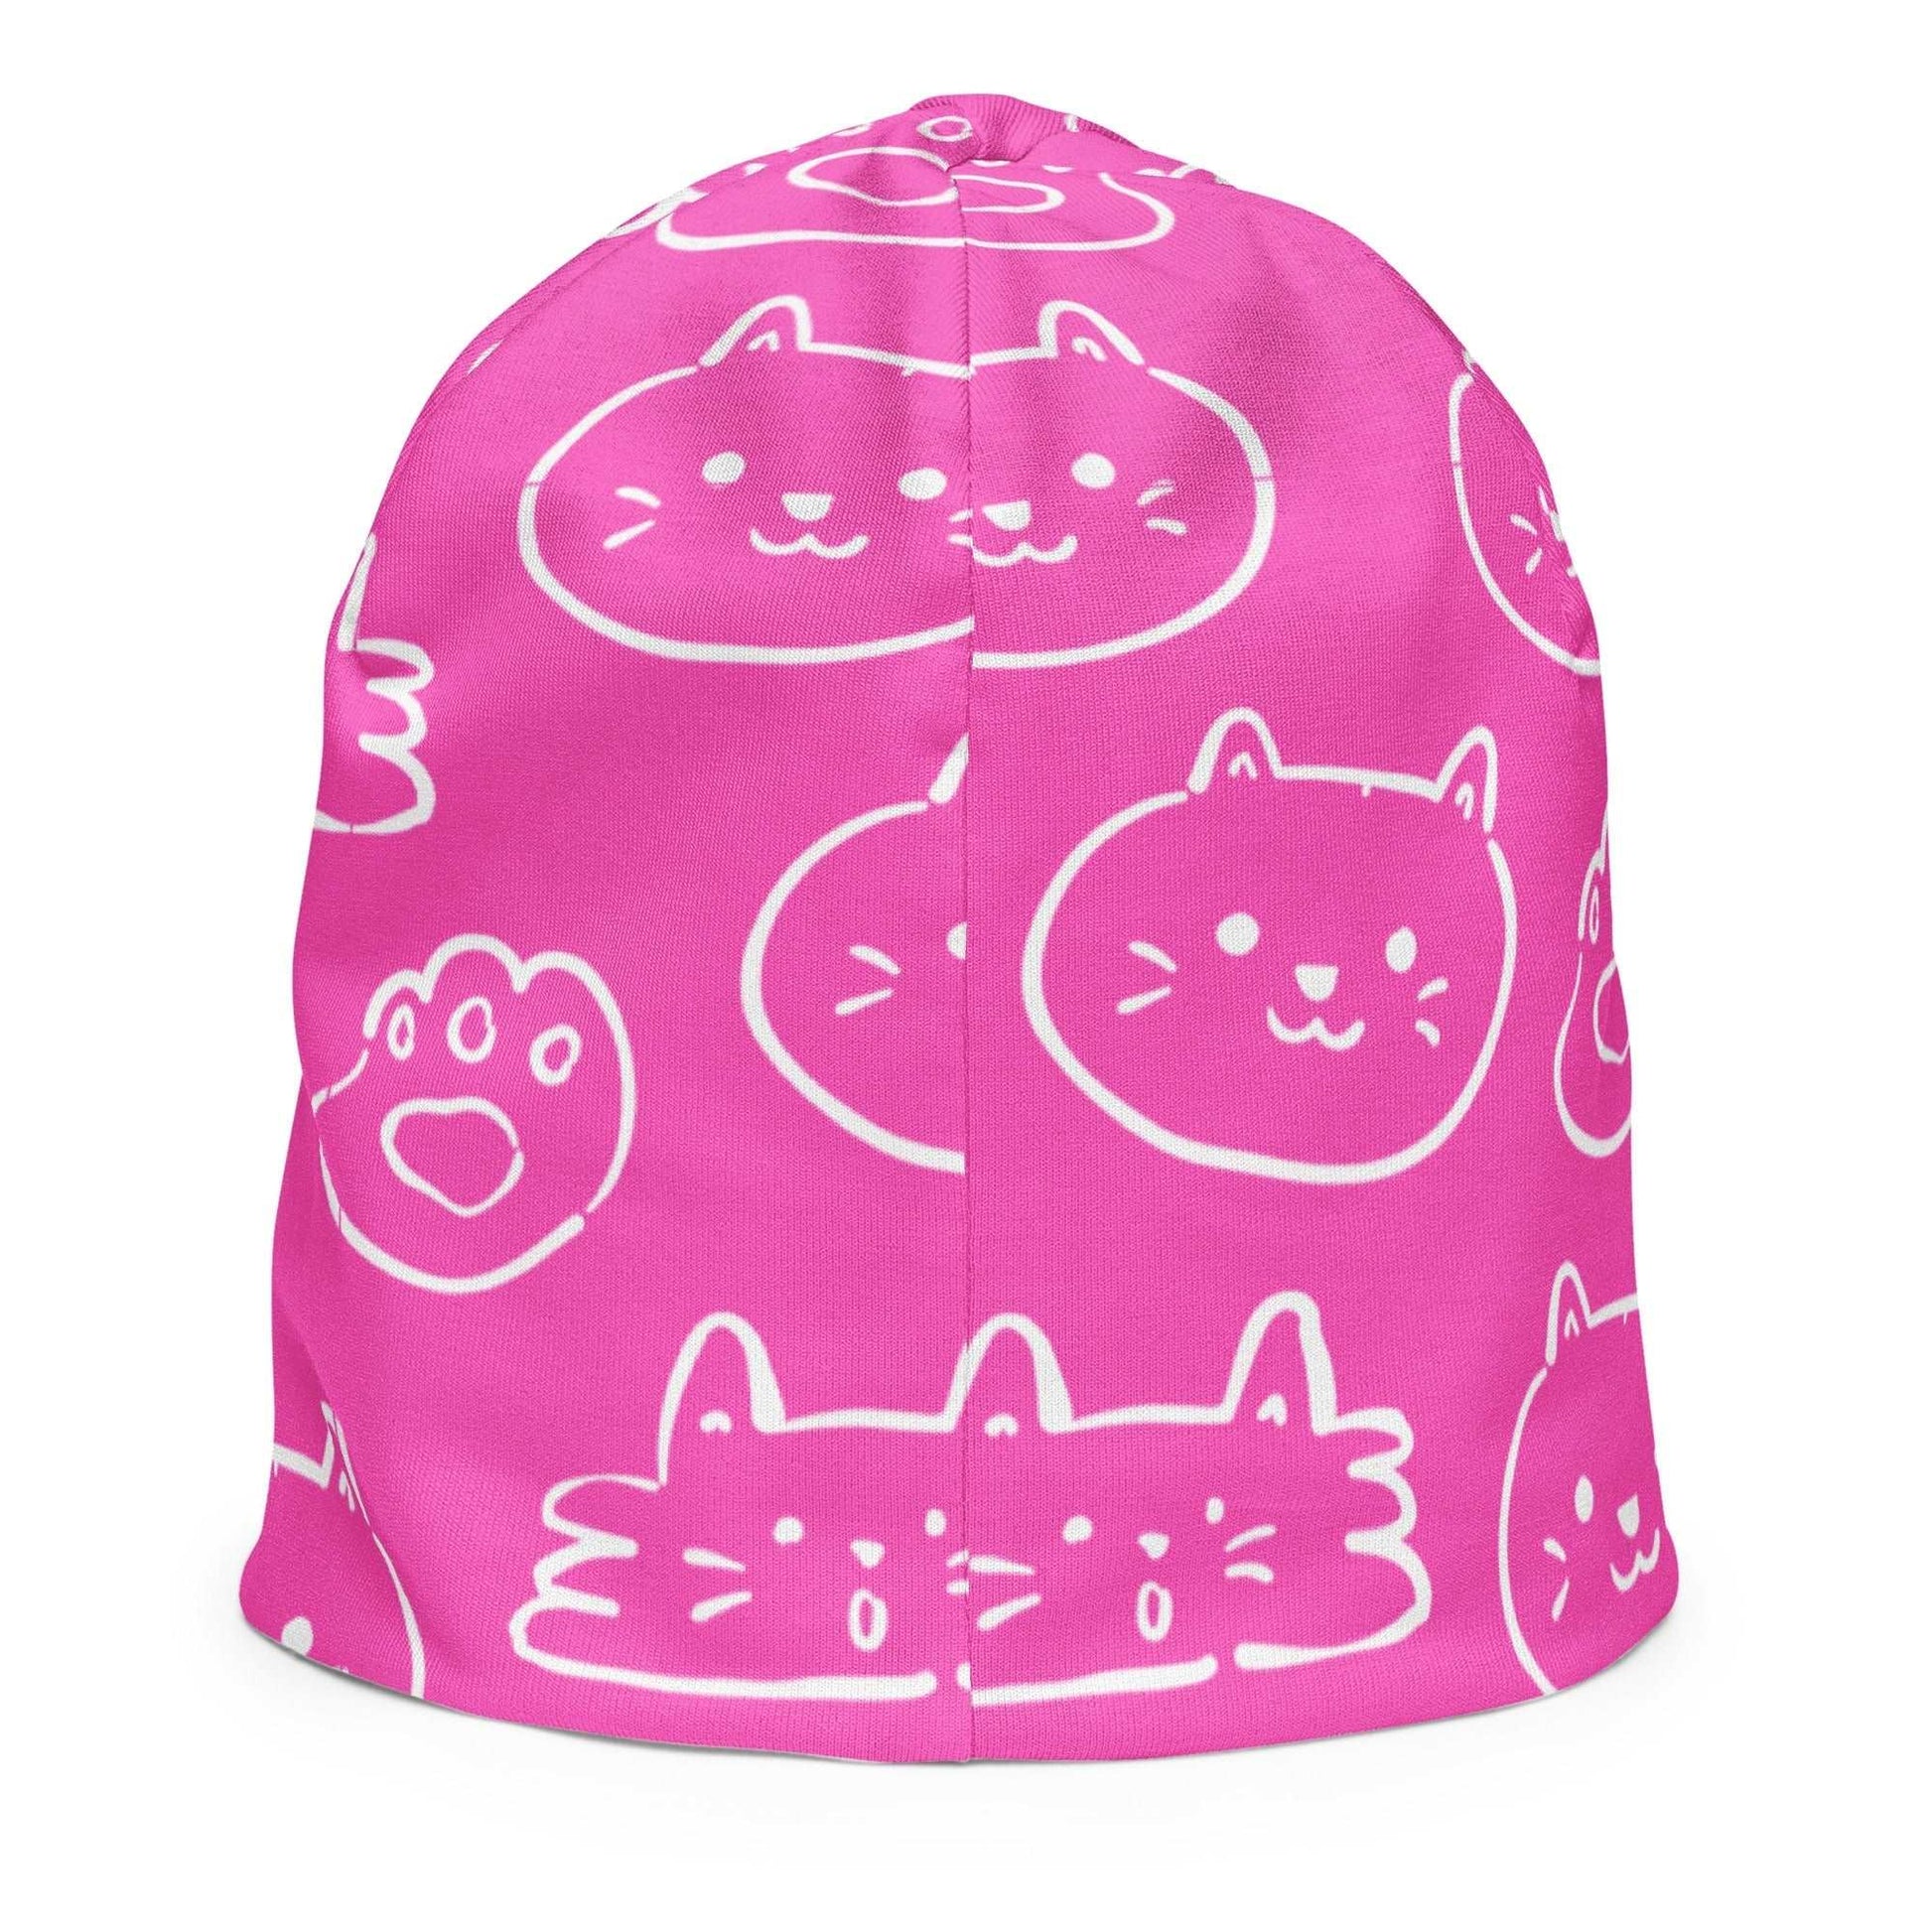 All-Over Cute Animals Print Girl's Beanie FLAKOUT